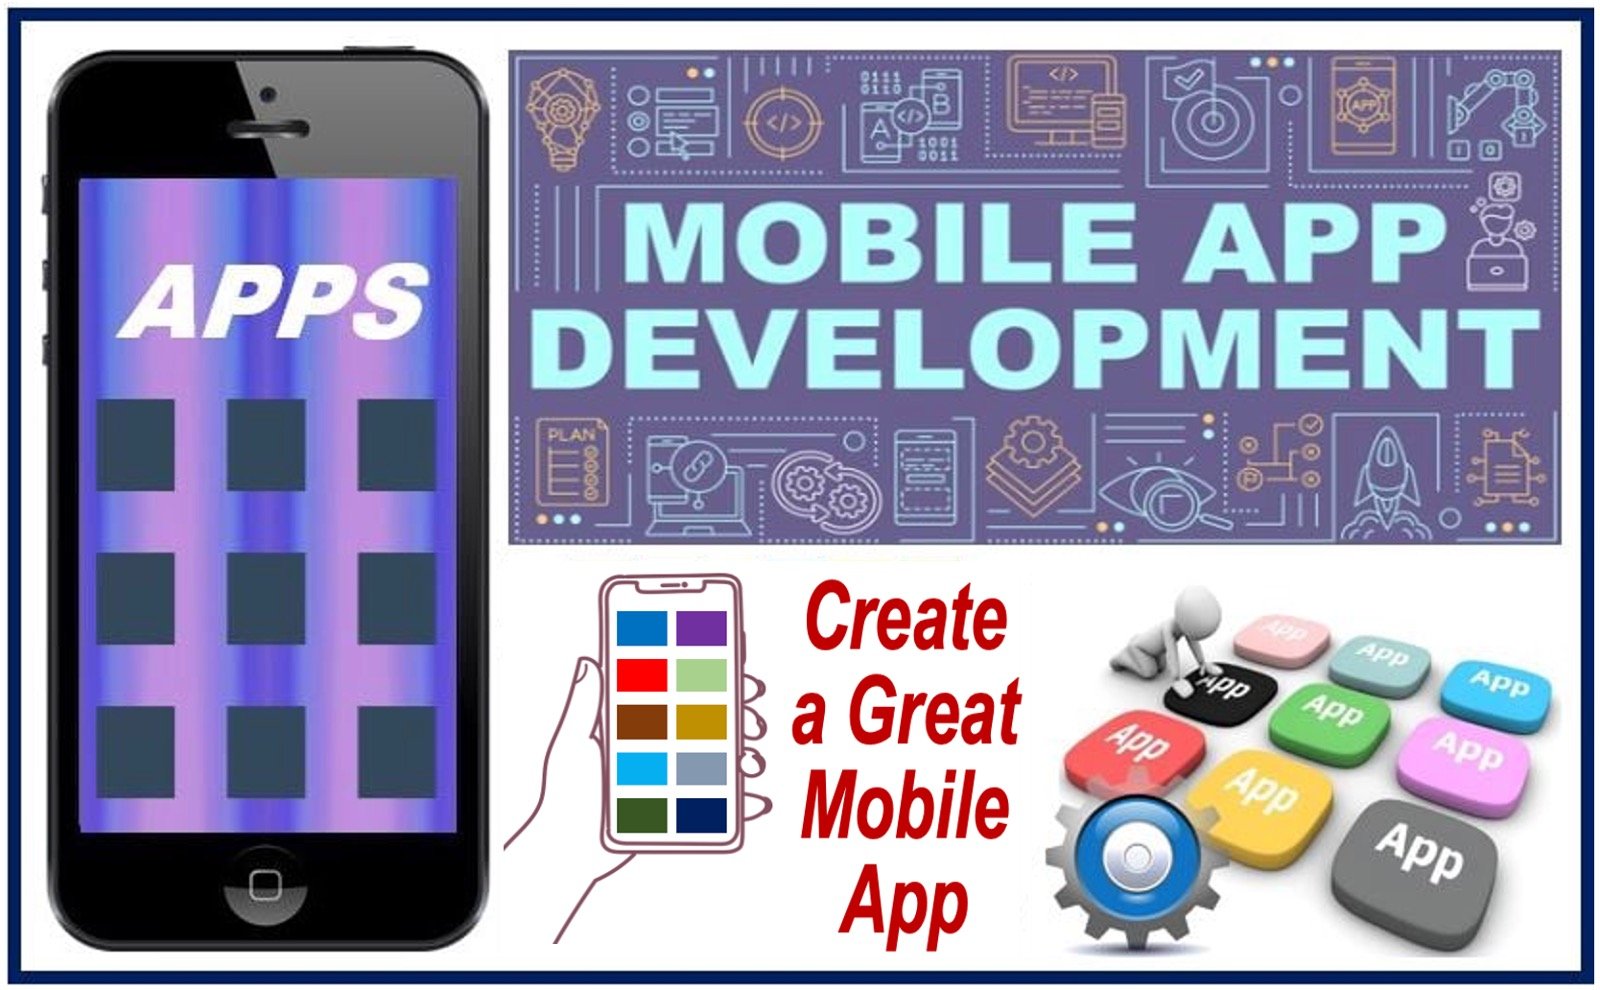 Build a great mobile application